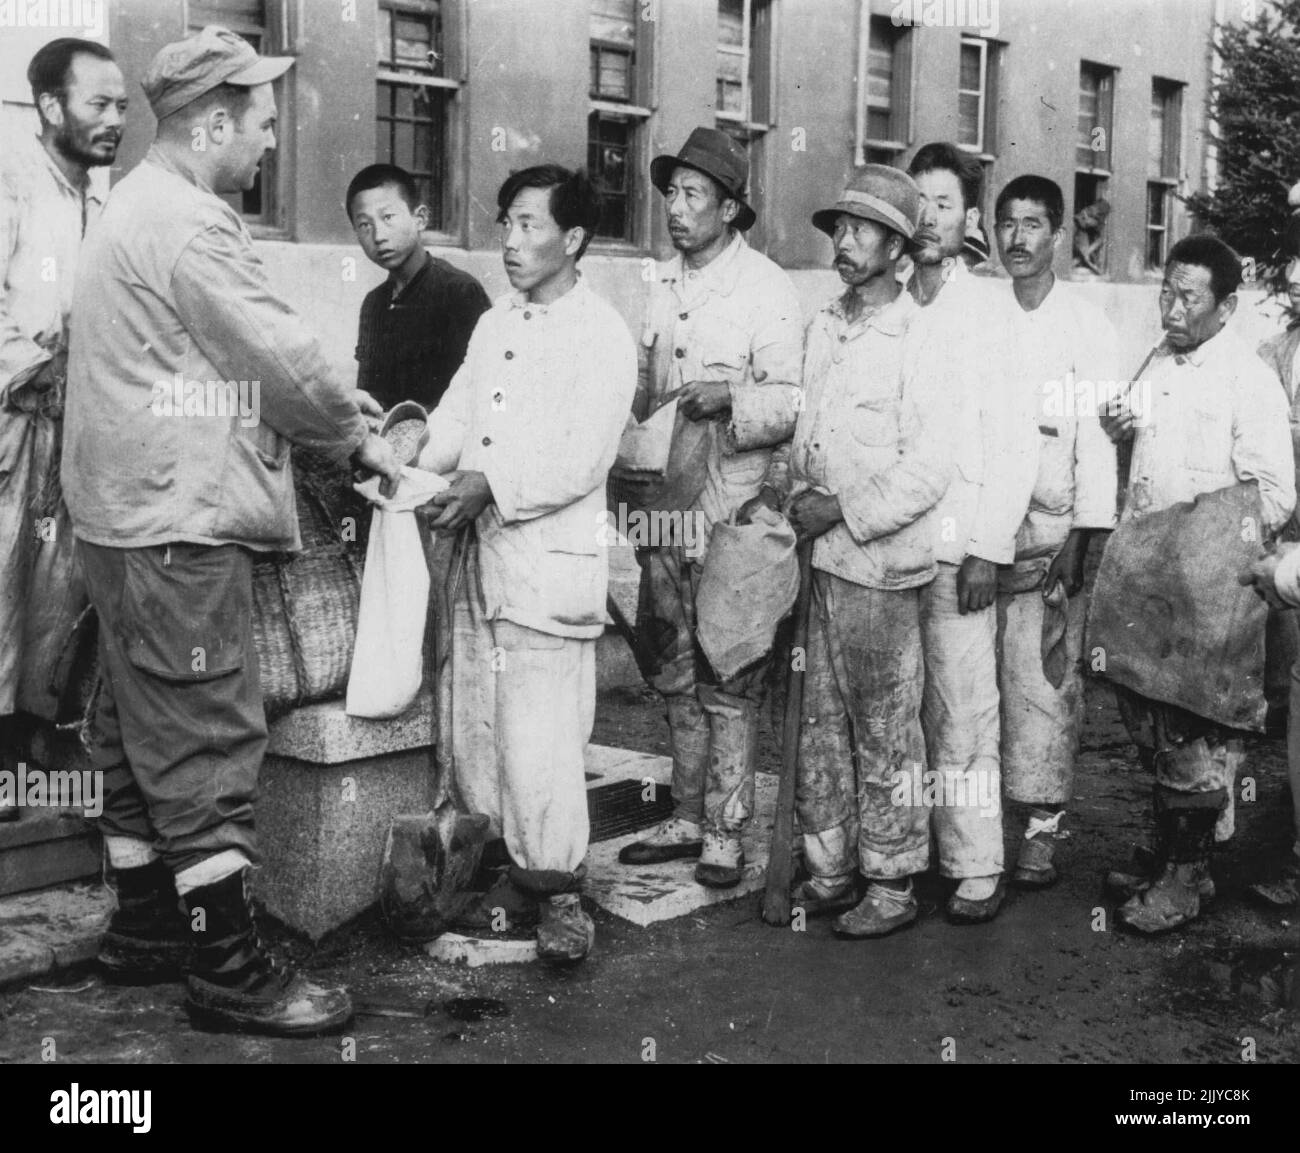 Korean Laborers Paid Off In Rice -- M/Sgt. Robert J. Ross, USMC, of Santa Ana, Calif., pays Korean laborers employed by the Marines at the Wonsan airstrip in North Korea with rice, the accepted form of payment. The Korean workers are used to help clear the field. November 11, 1950. (Photo by AP Wirephoto). Stock Photo